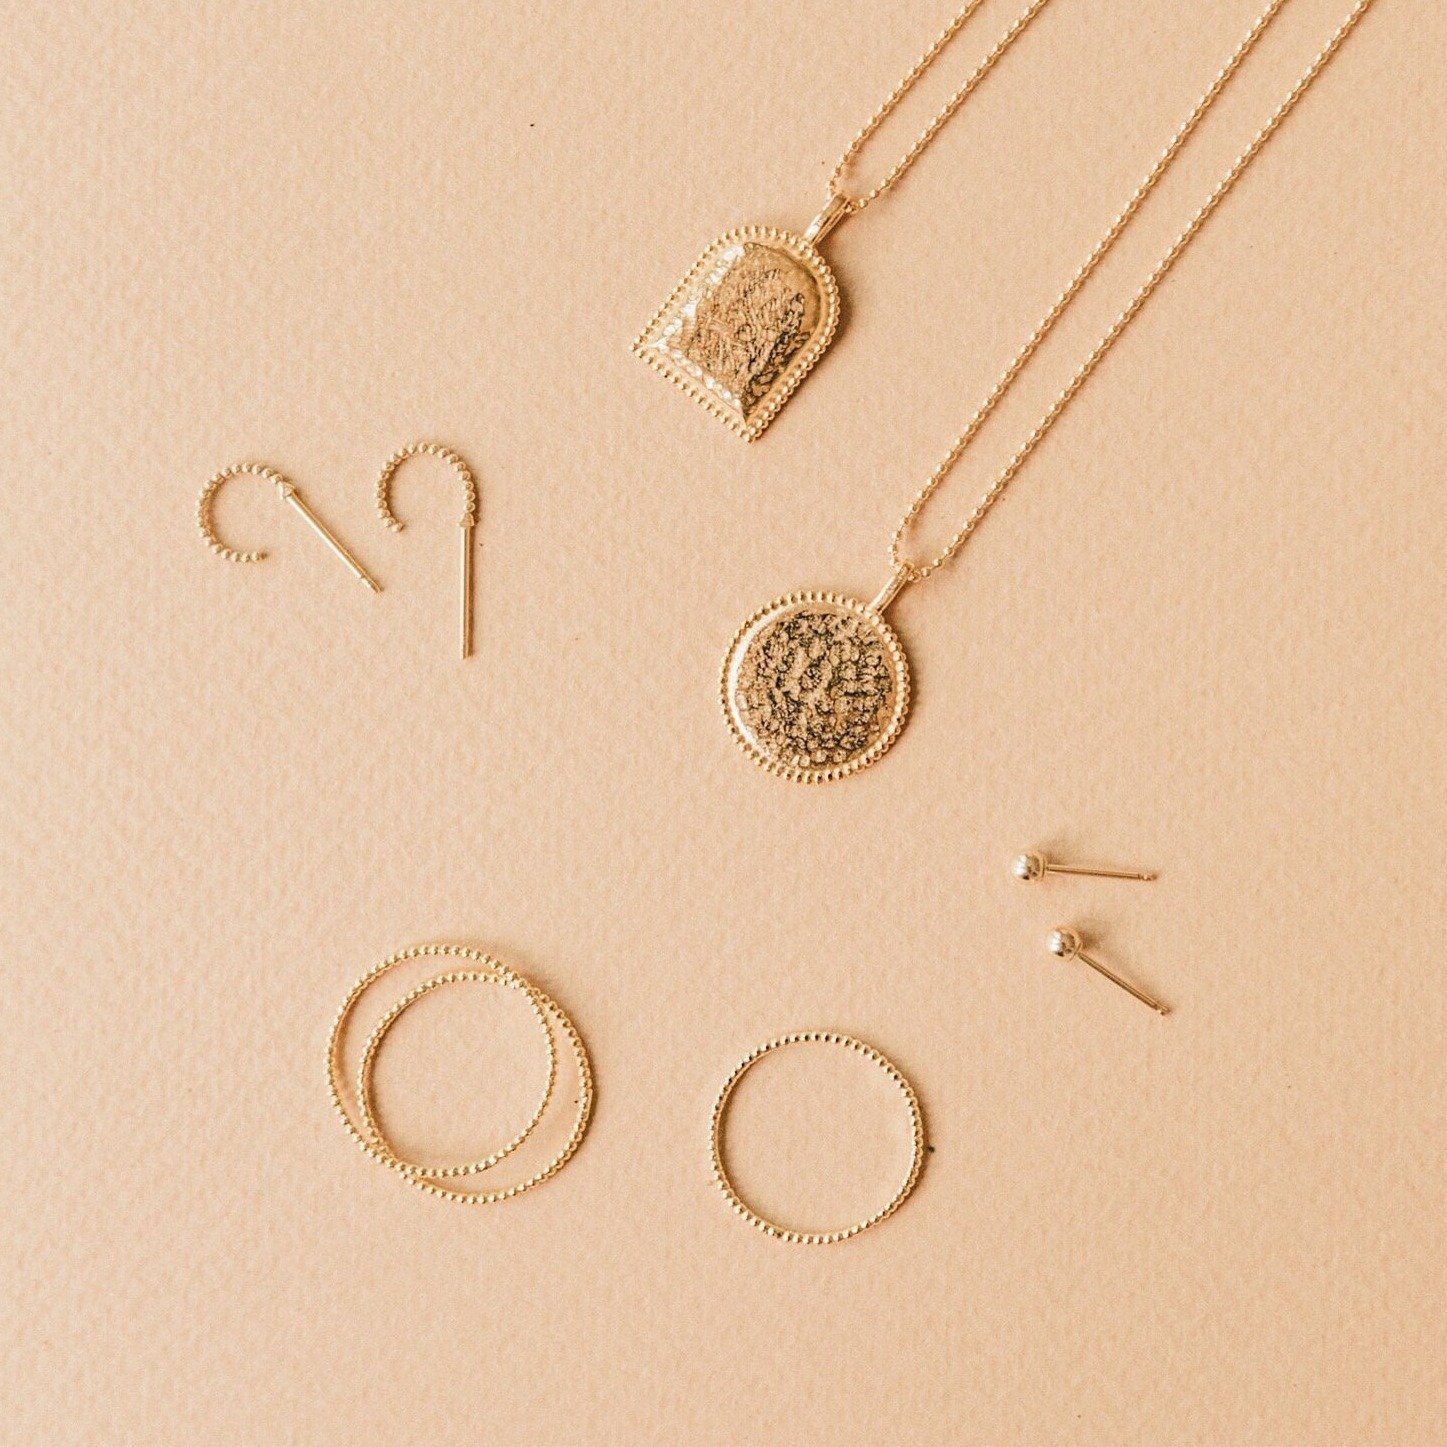 Beaded Coin Necklace, Beaded Arch Necklace, Beaded Rings and Beaded Hoop Earrings laying on a light brown background.